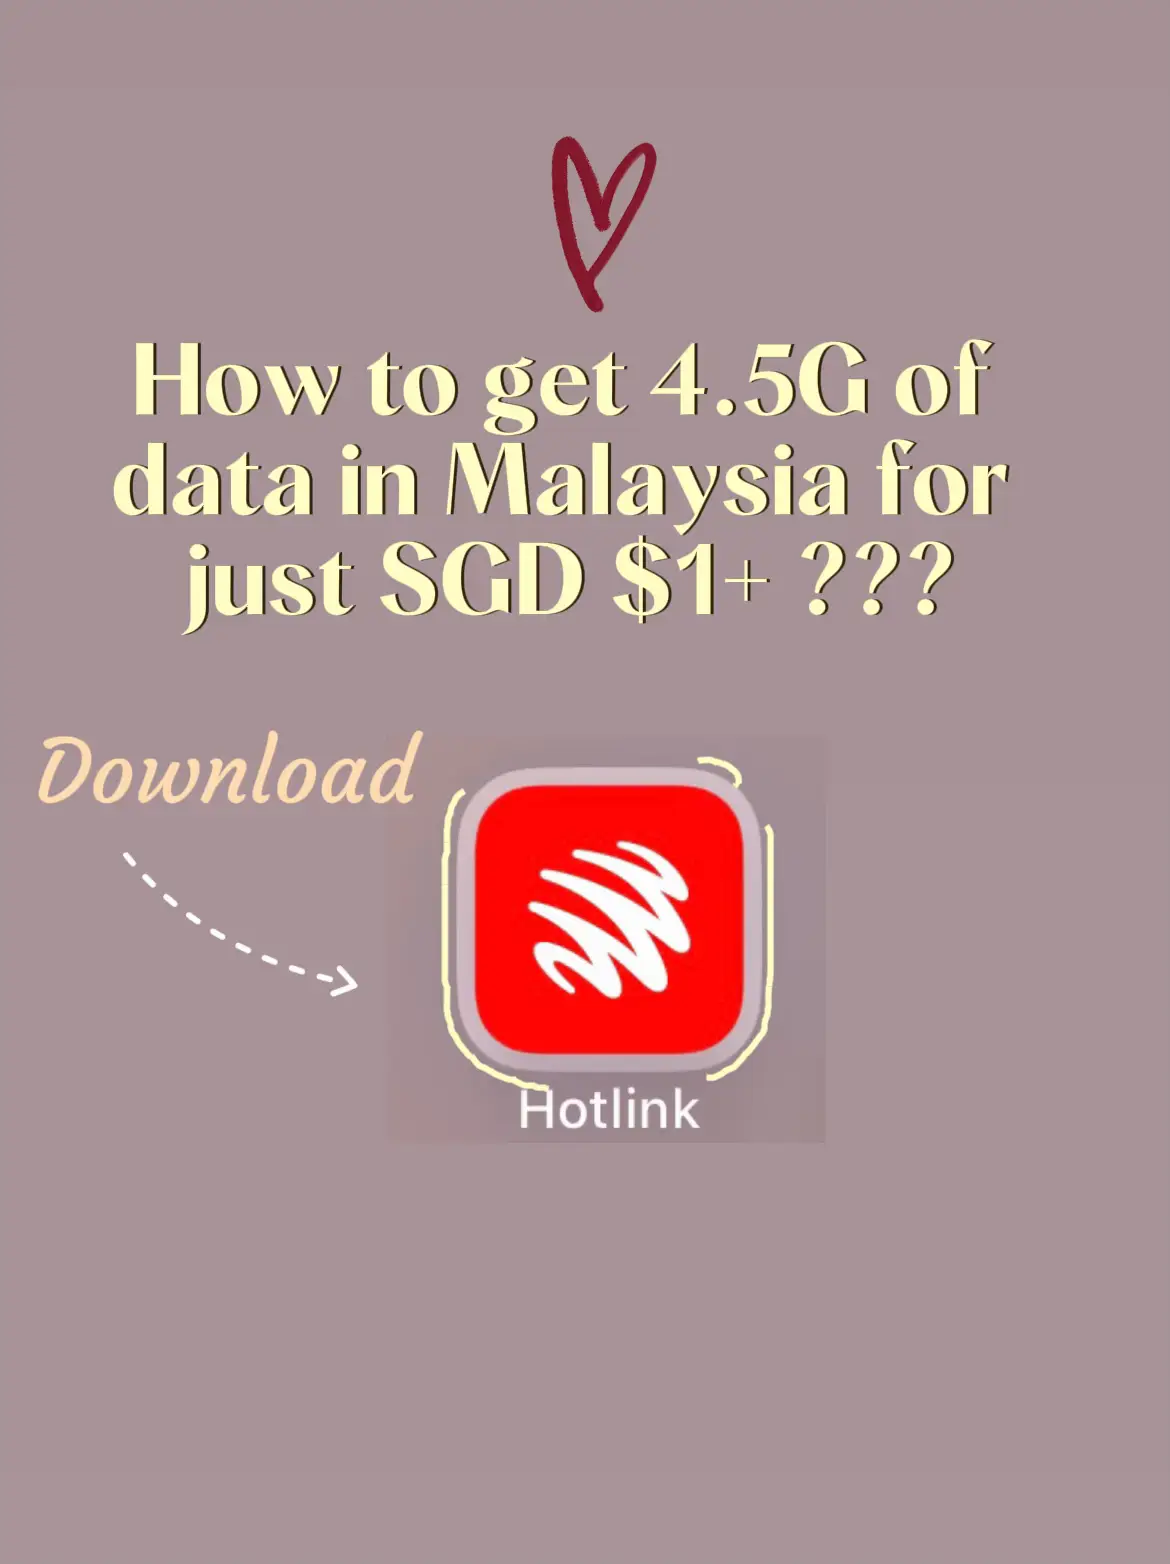 How to get 4.5G data plan in Malaysia for SGD$1+++'s images(0)